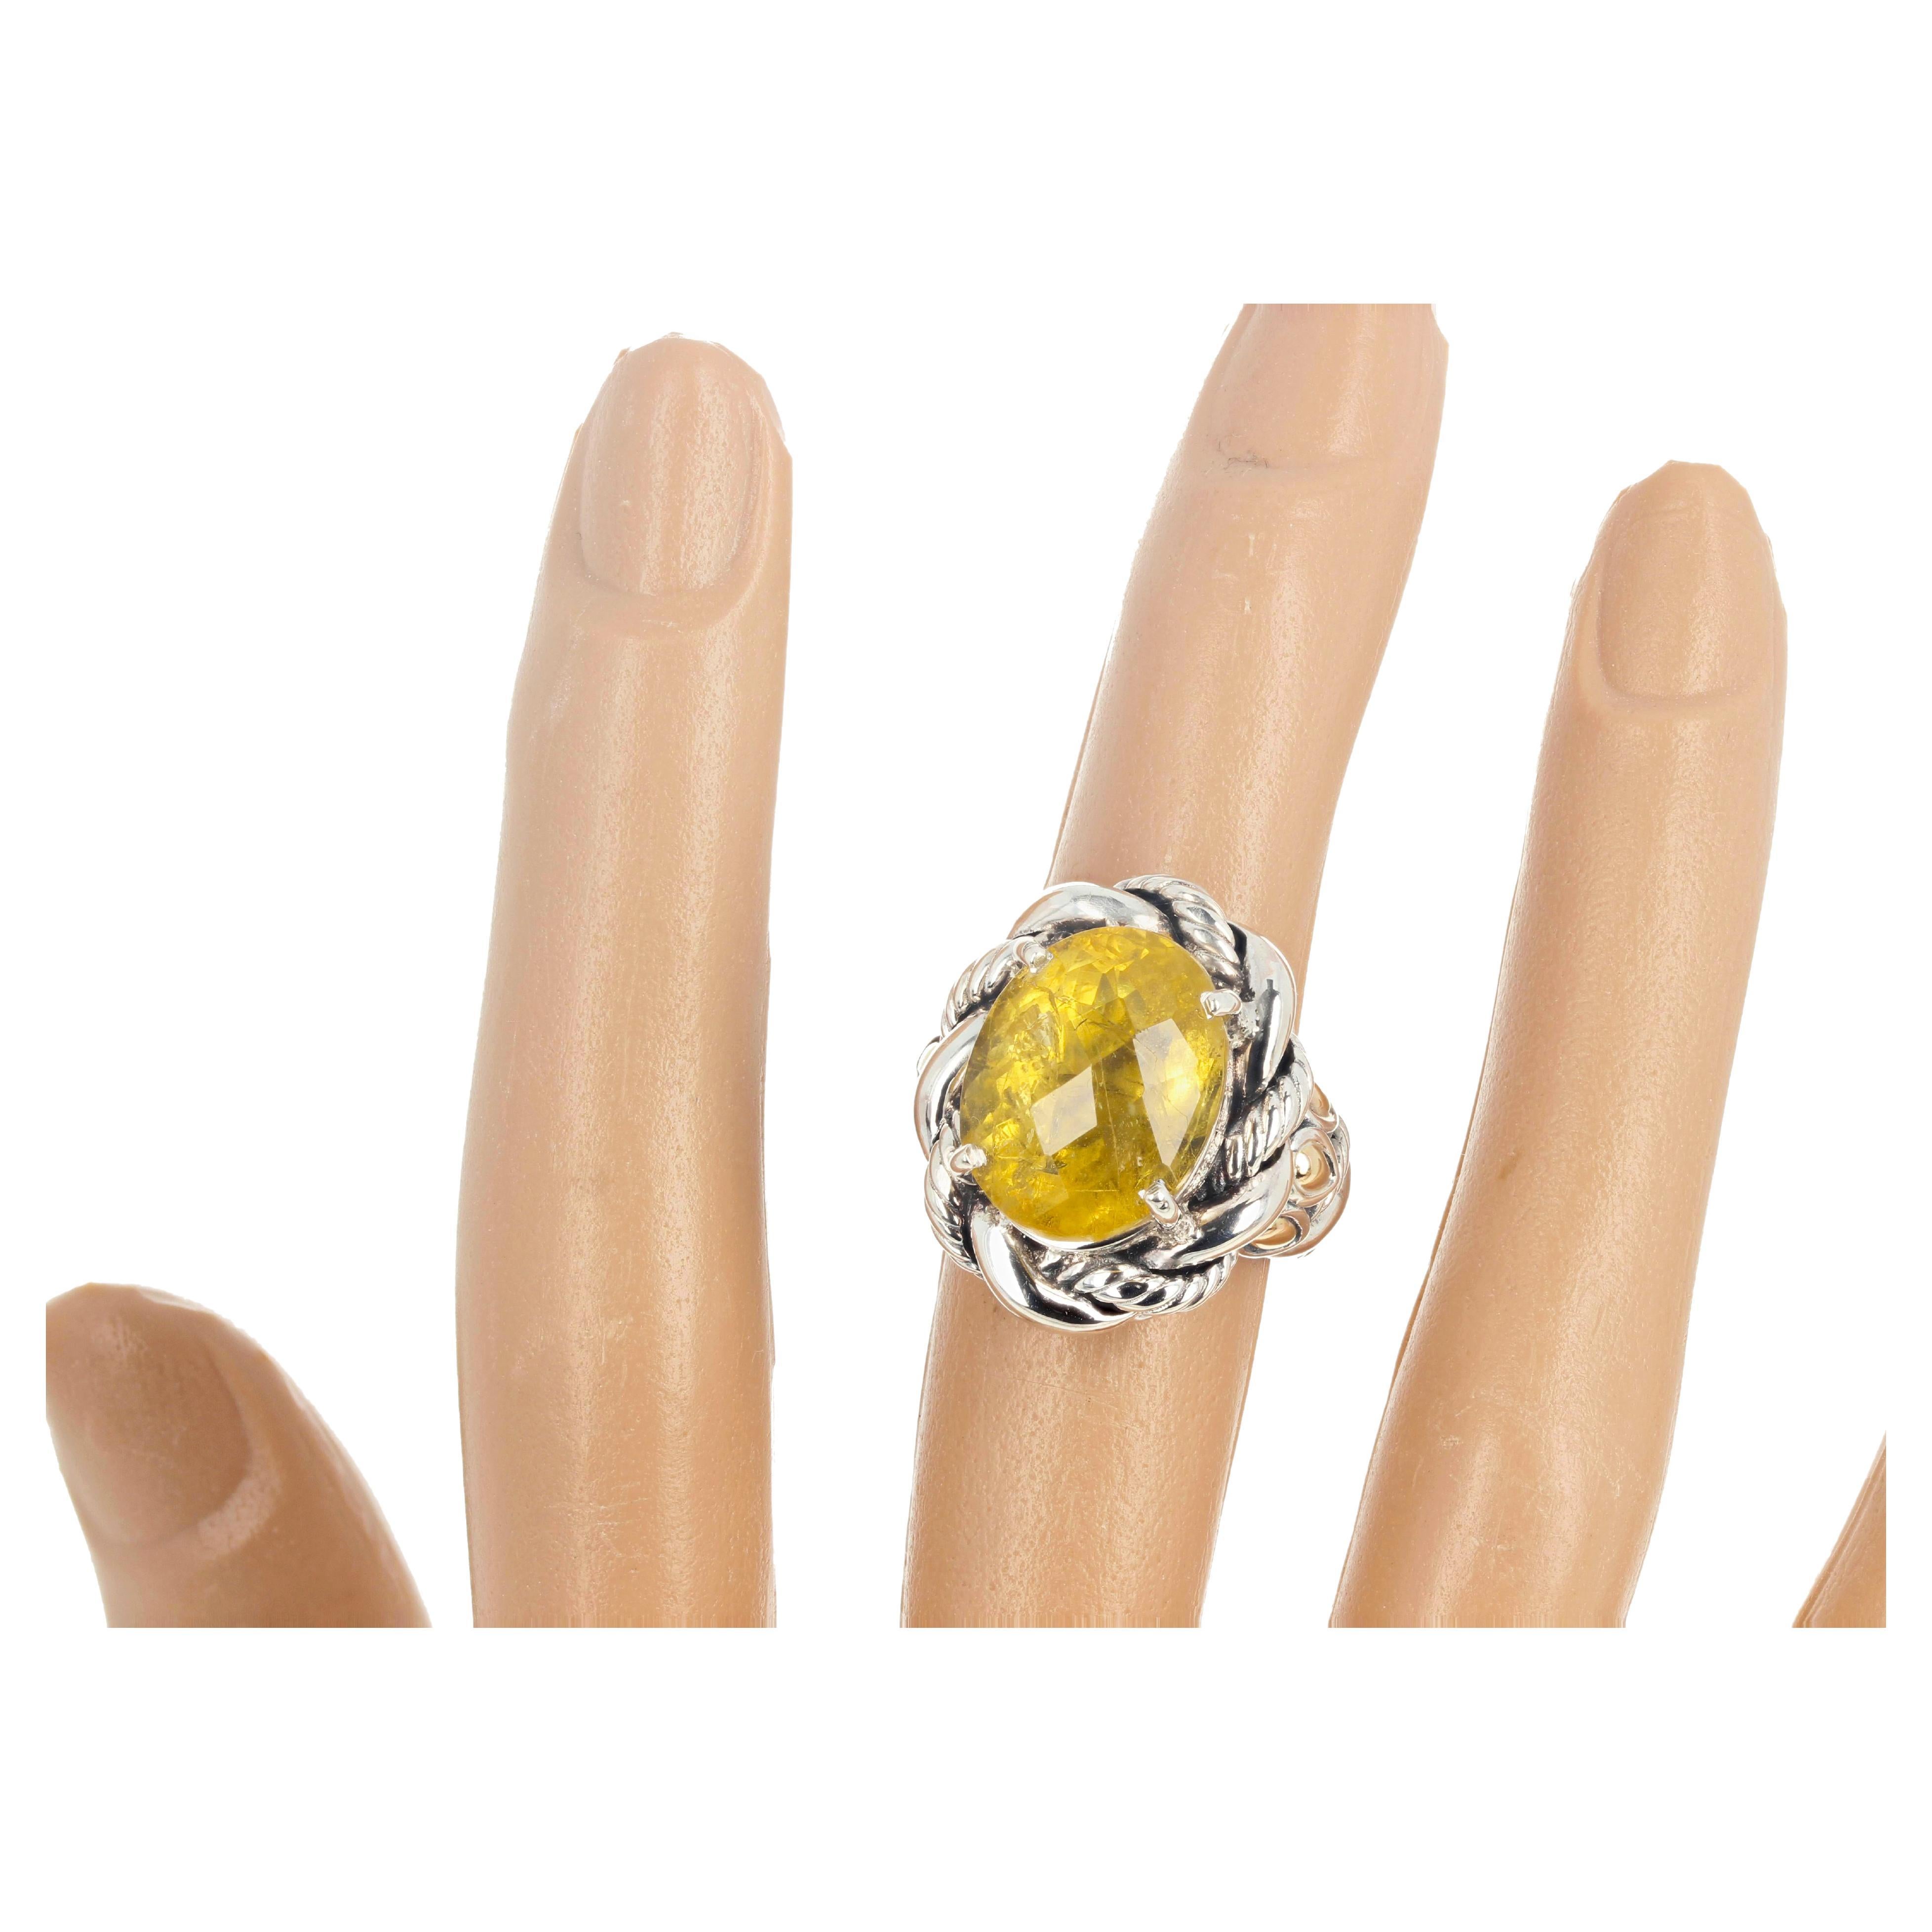 AJD Foggy Glittering Natural 6.84 Ct. Yellow Beryl Sterling & Gold Silver Ring